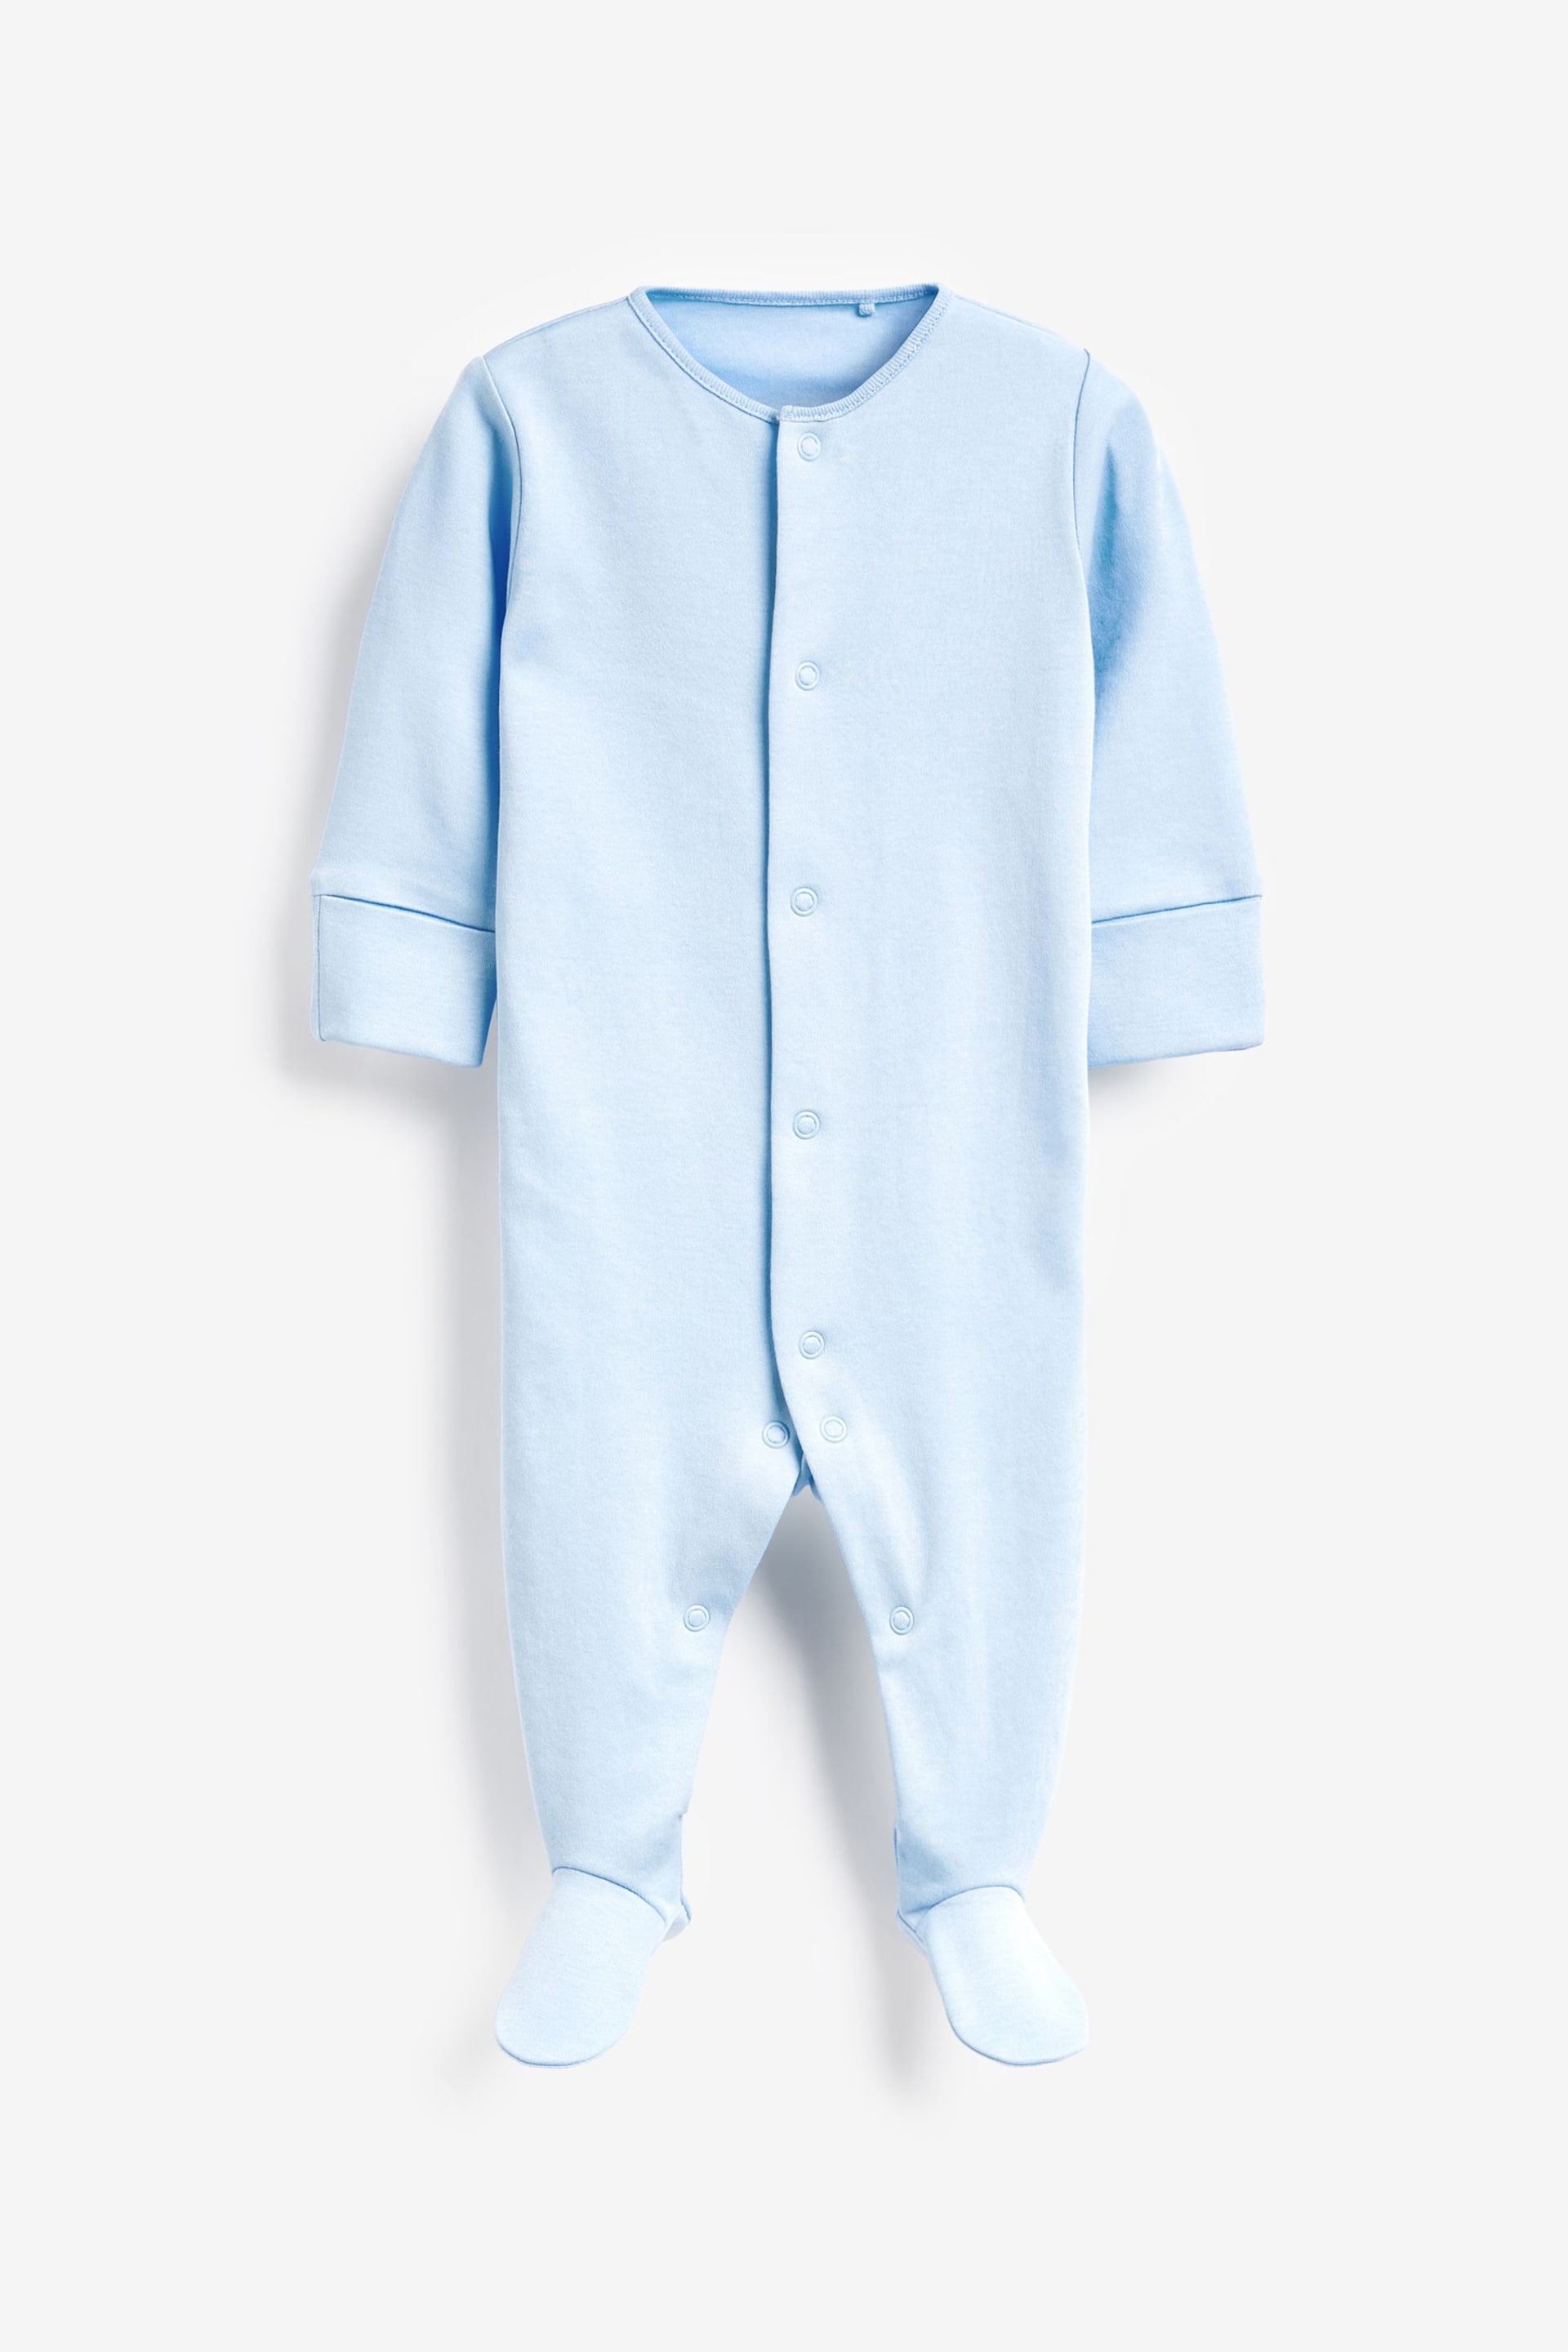 Blue/White 5 Pack Cotton Baby Sleepsuits (0-2yrs) - Image 3 of 7